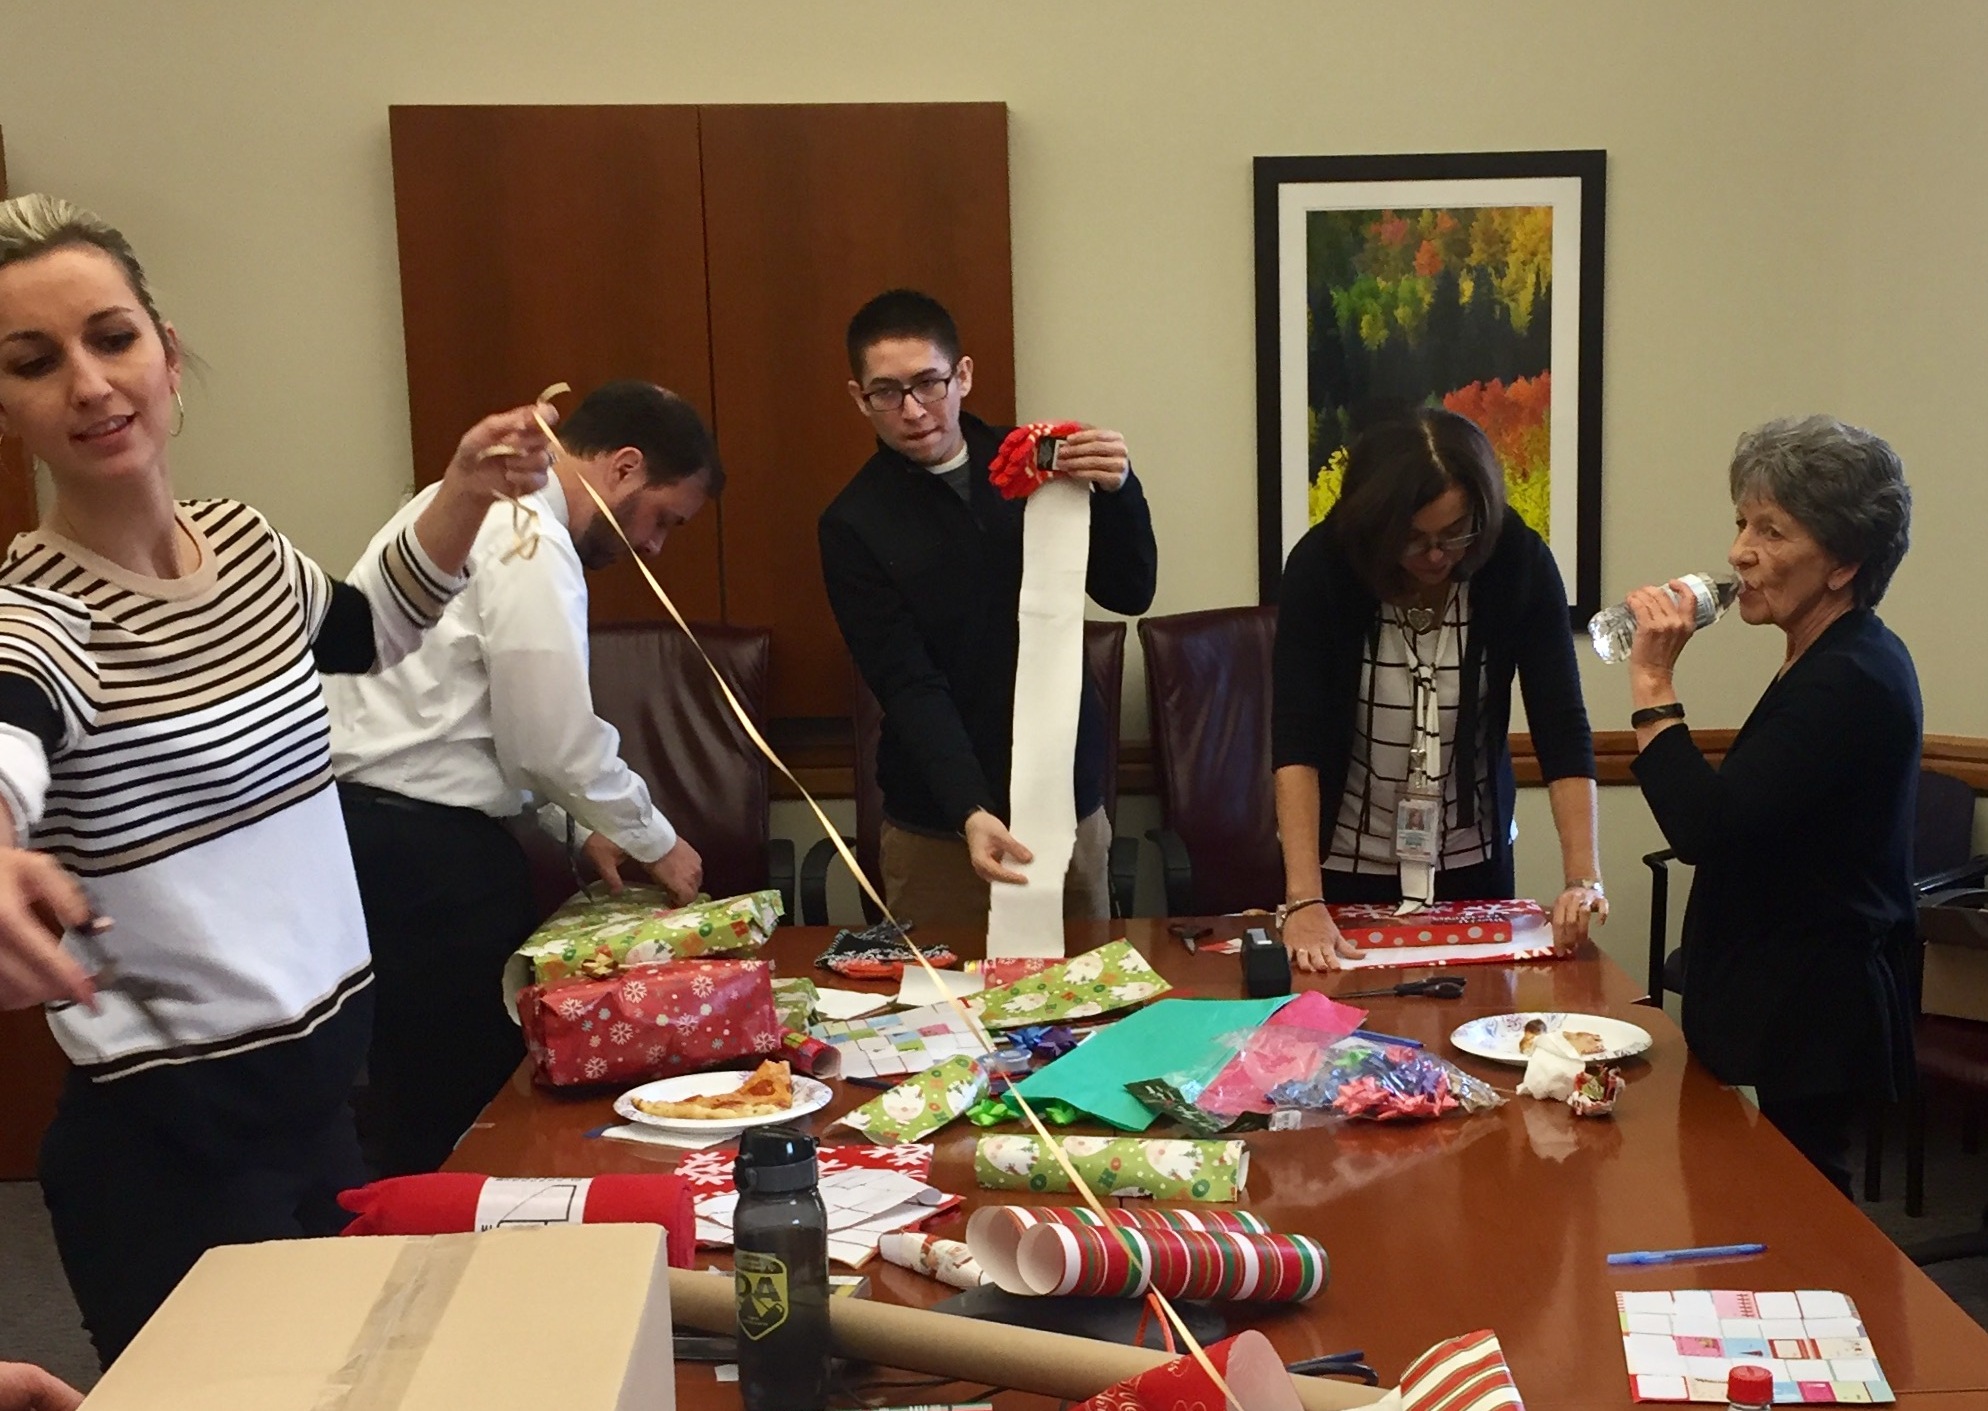 Image 5: Wrapping for Adopt-A-Family